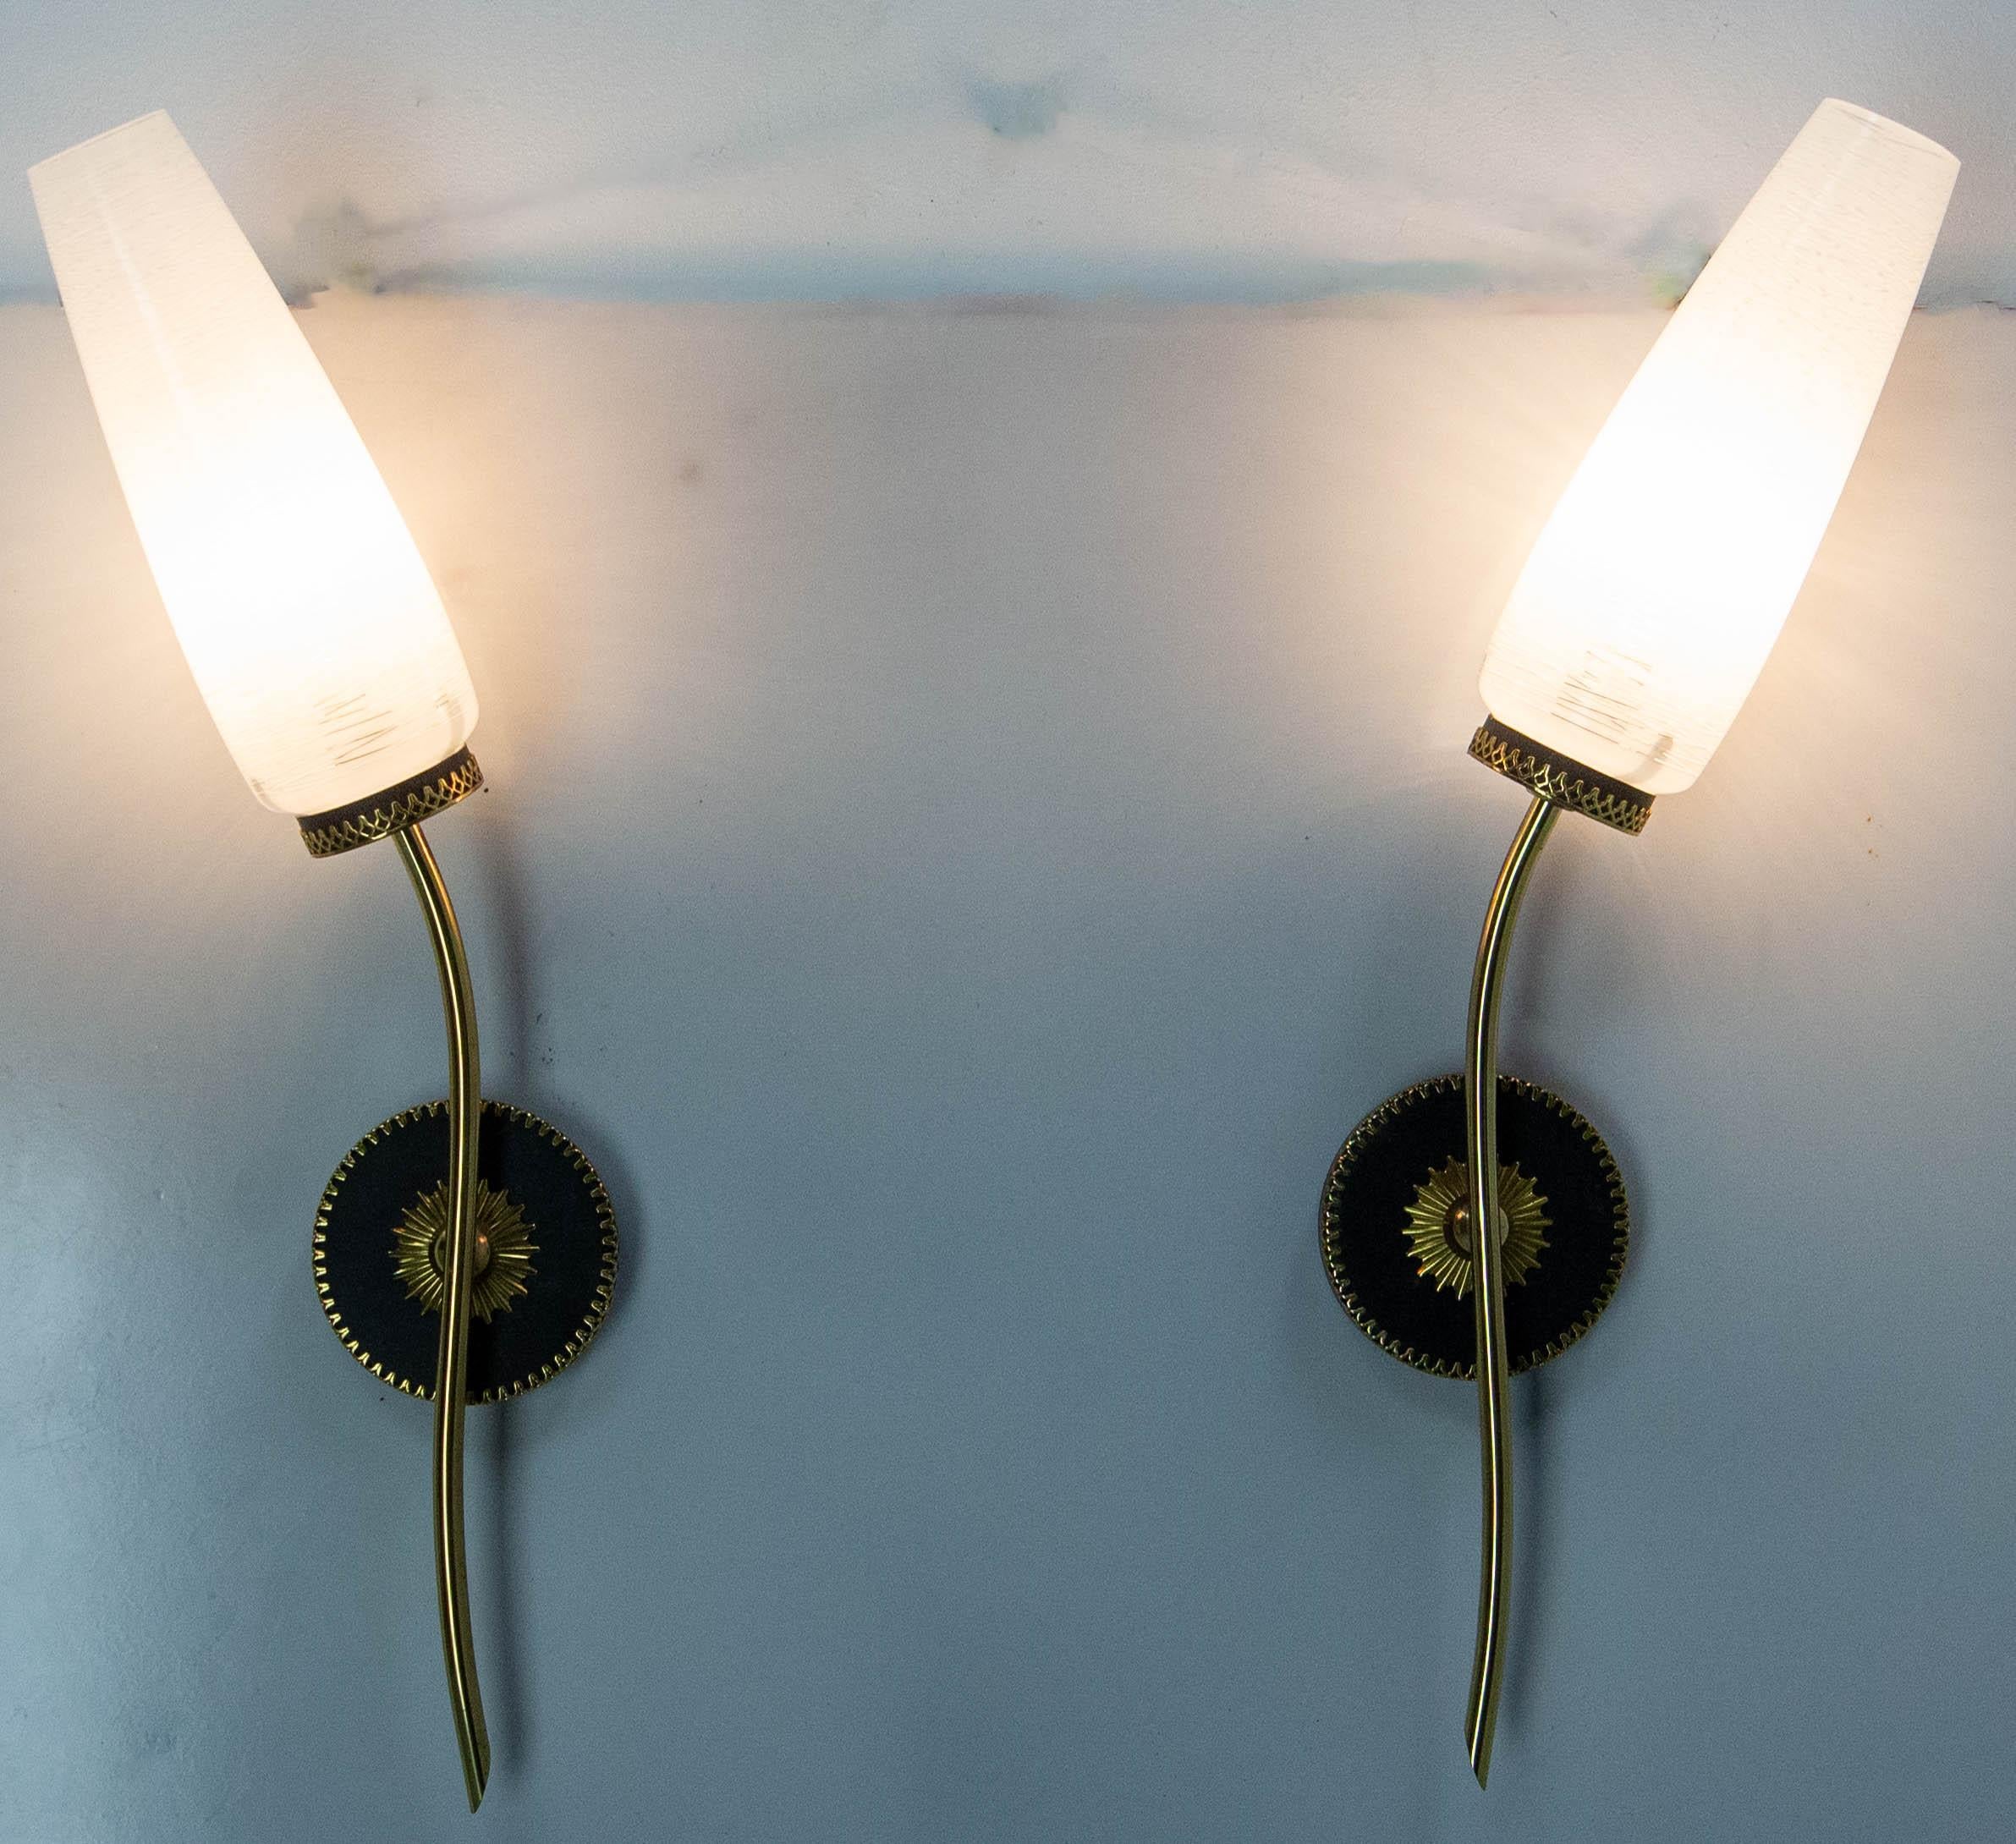 French Pair of Sconces Frozen Glass Black & Golden Chrome circa 1960 Arlus Style France For Sale